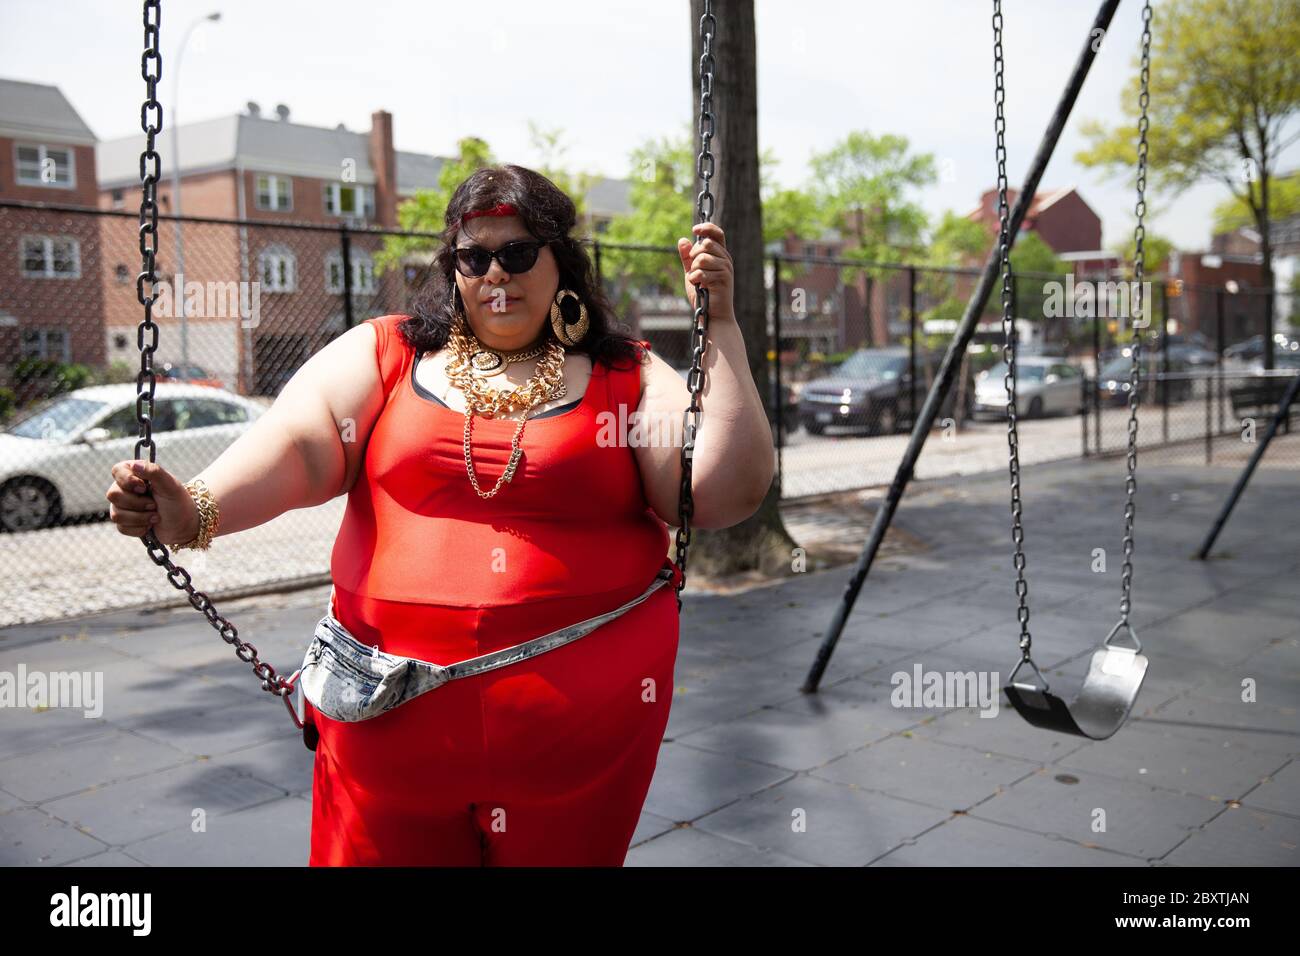 Janie Martinez, a New York based plus-size actress, model, dancer, singer, and body positivity activist, on the set of the music video for Action Bronson's latest single “Strictly 4 my jeeps” in Queens, New York, United States on May 10, 2013. The music video is directed by Jason Goldwatch. Action Bronson, is an American rapper from Flushing, Queens, New York of Albanian descent. Photograph by Bénédicte Desrus Stock Photo